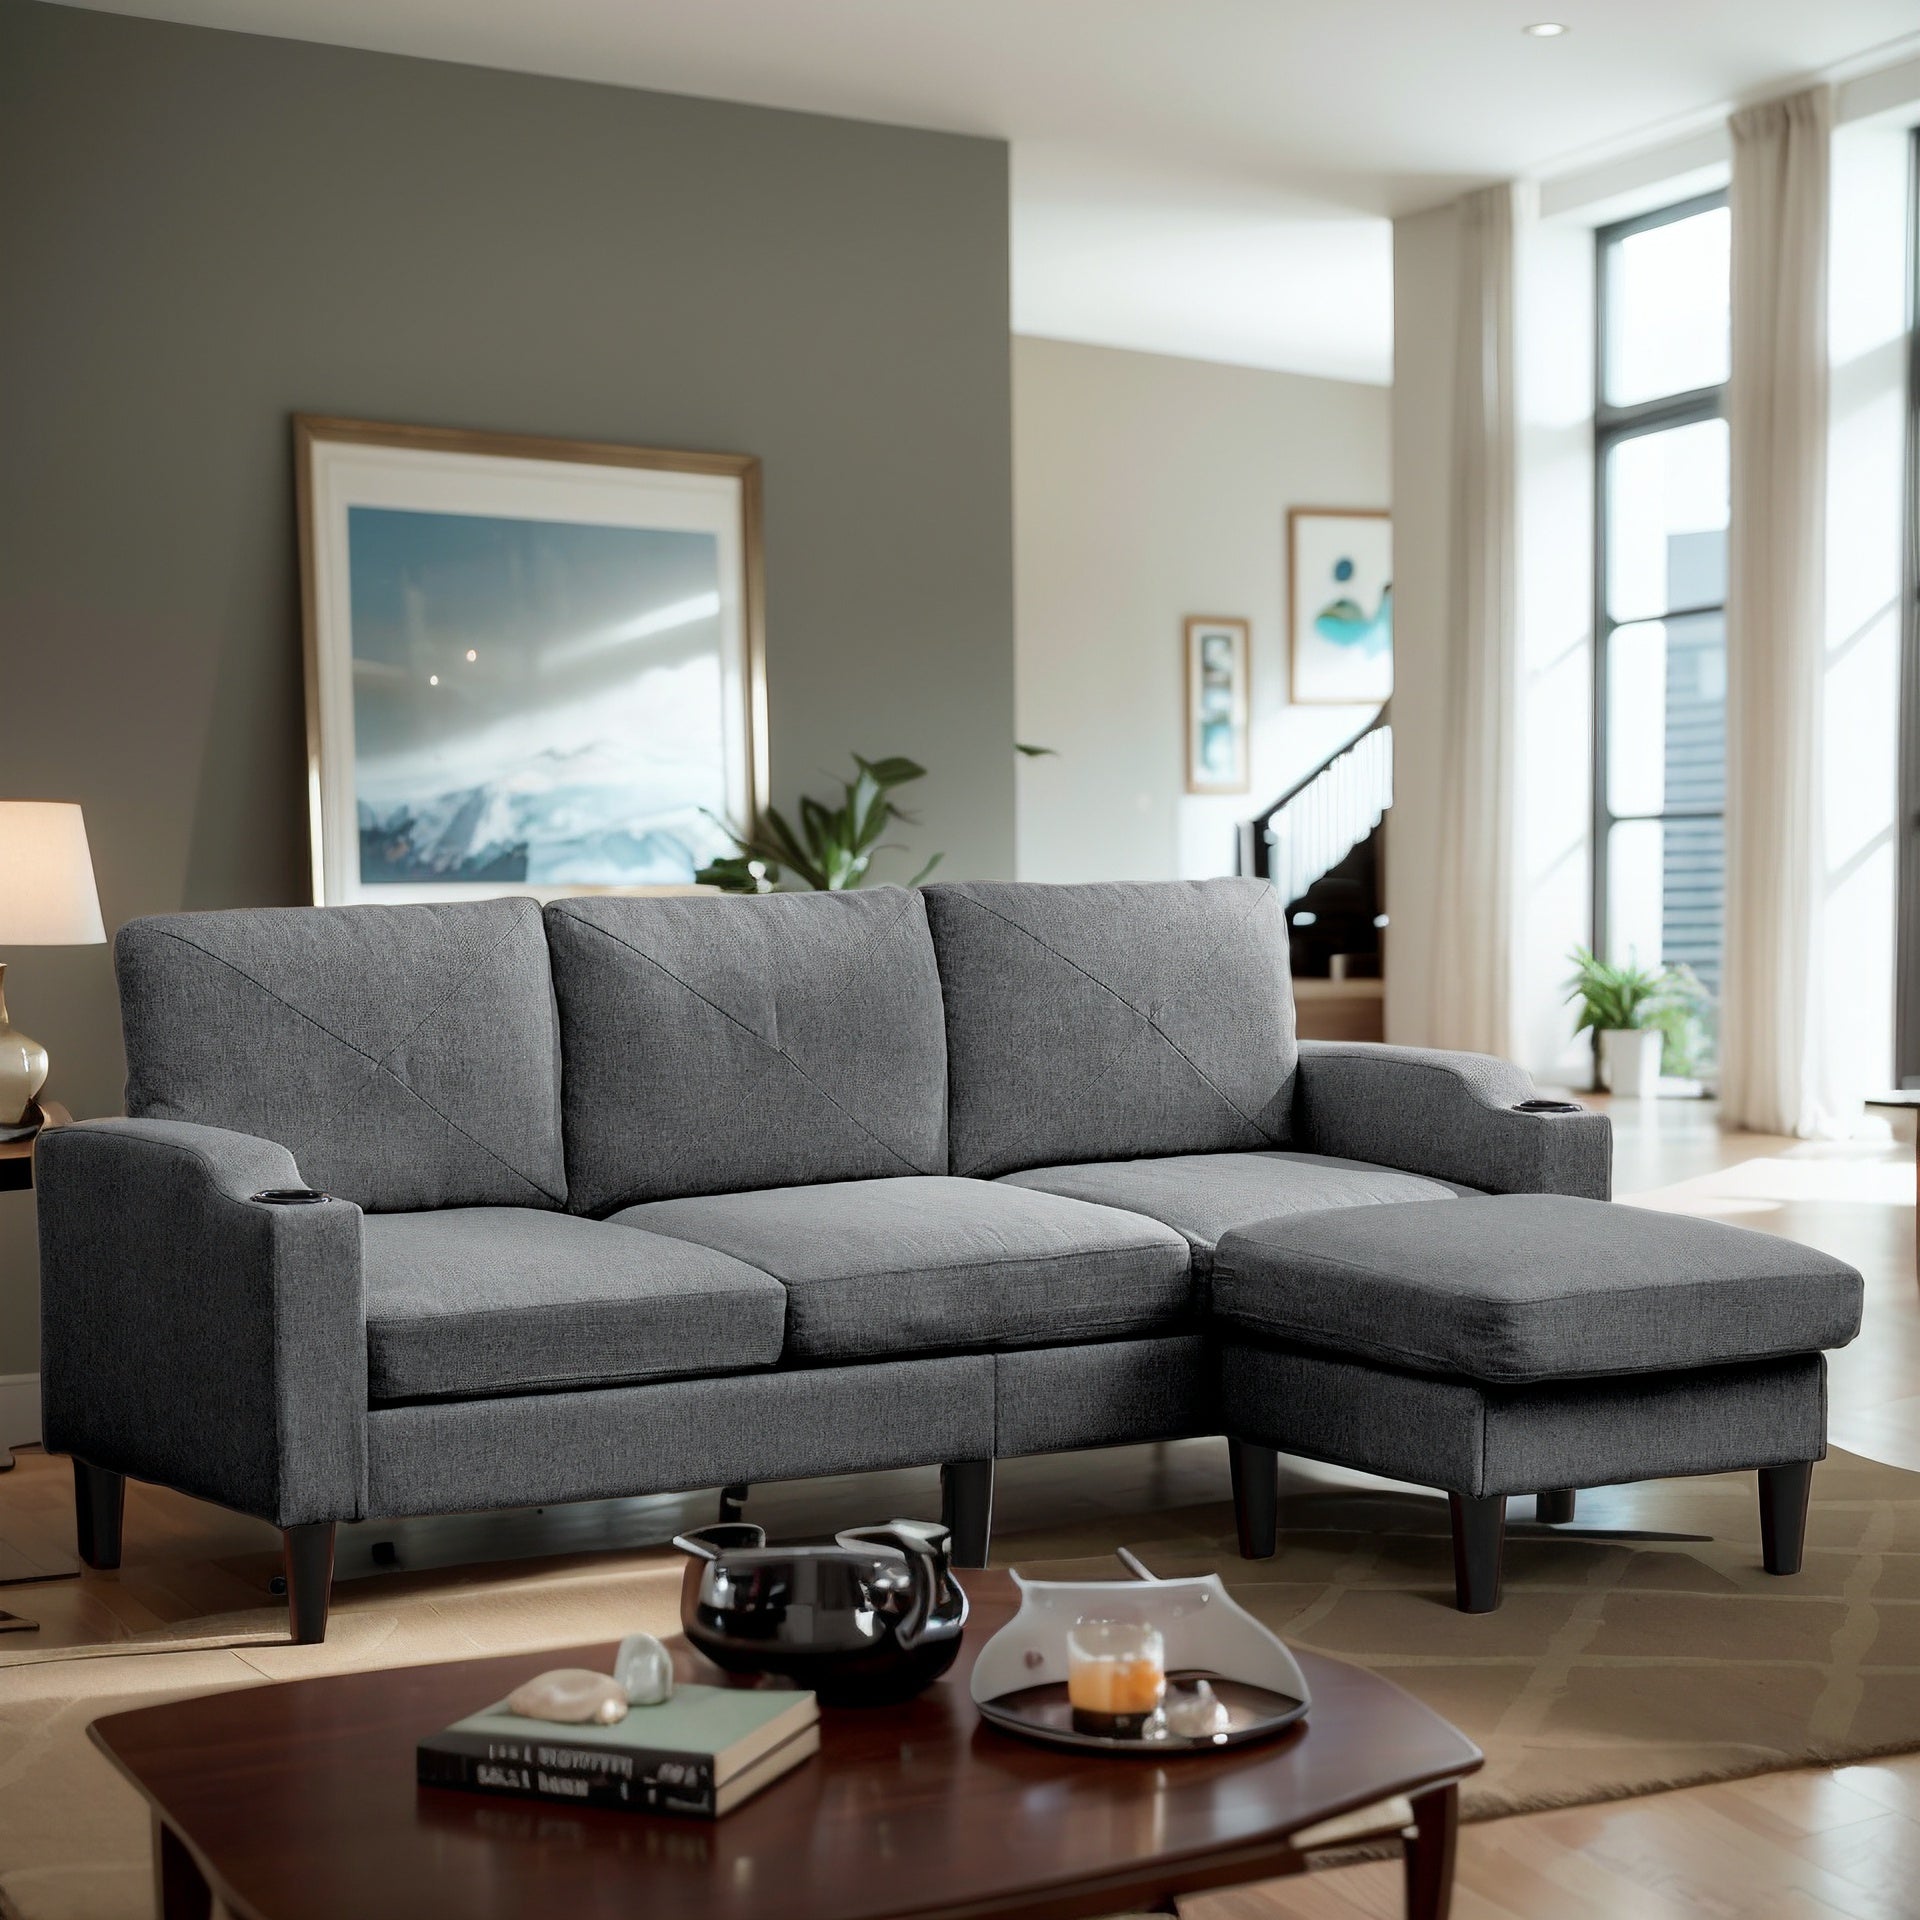 Cecer Sectional Sofa with Storage Ottoman, 3-Seat L-Shaped Couch with Cup Holders for Living room, Small Space